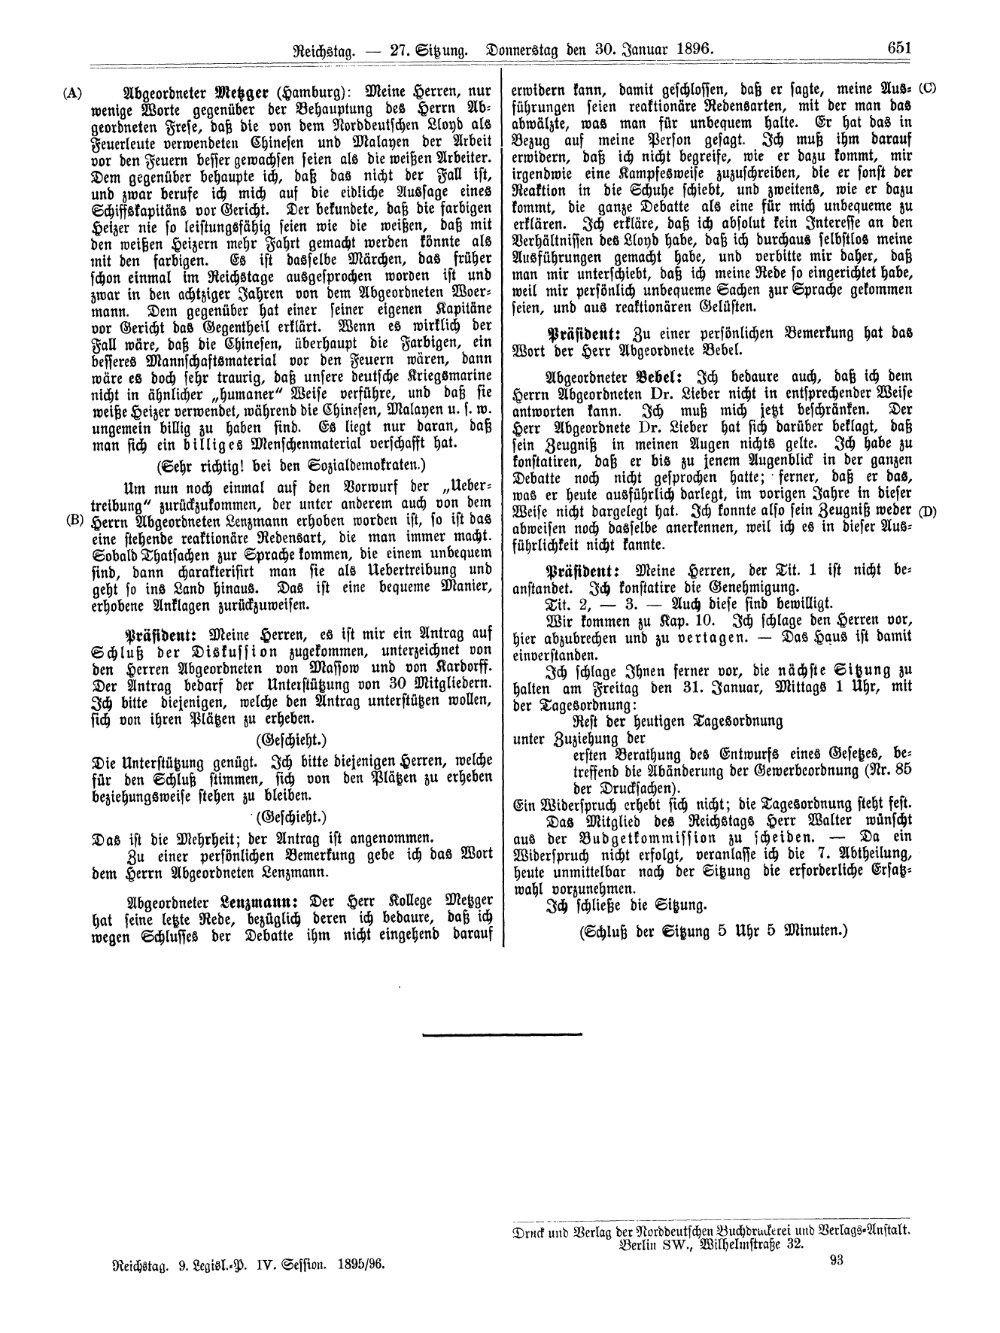 Scan of page 651